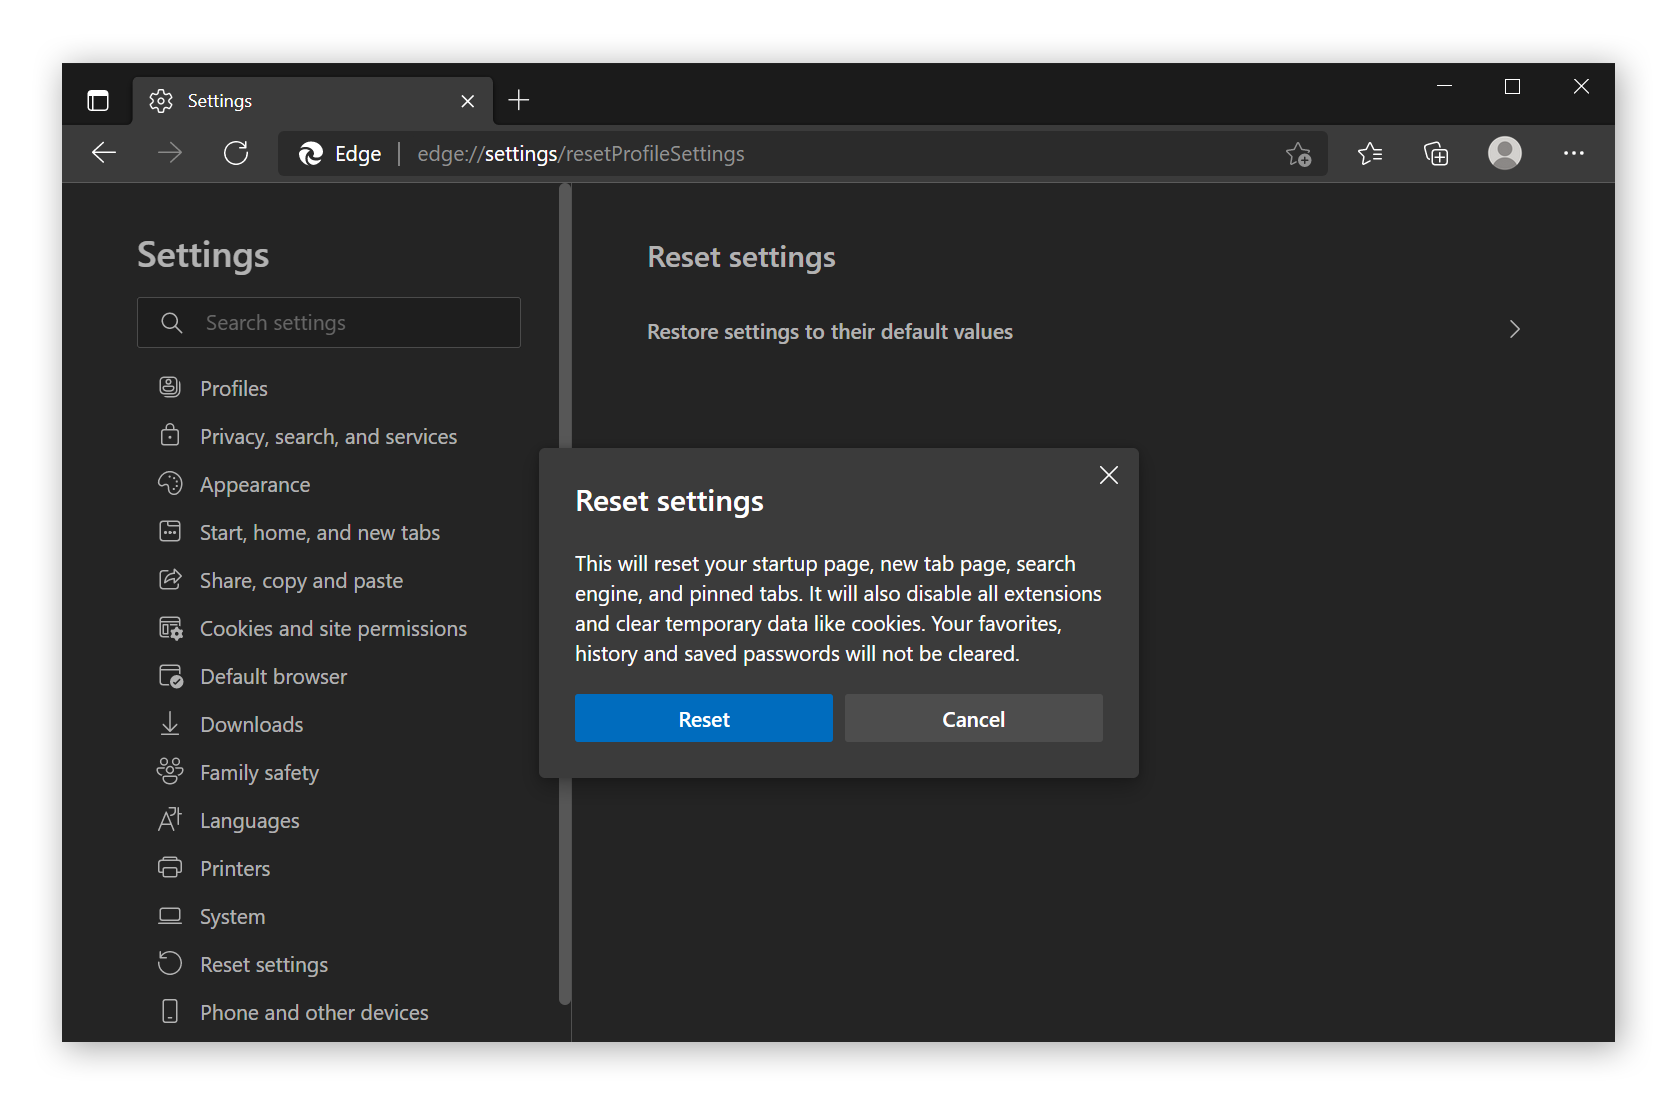 The prompt to reset Microsoft Edge and clear all data associated with it except favorites, history, and saved passwords.